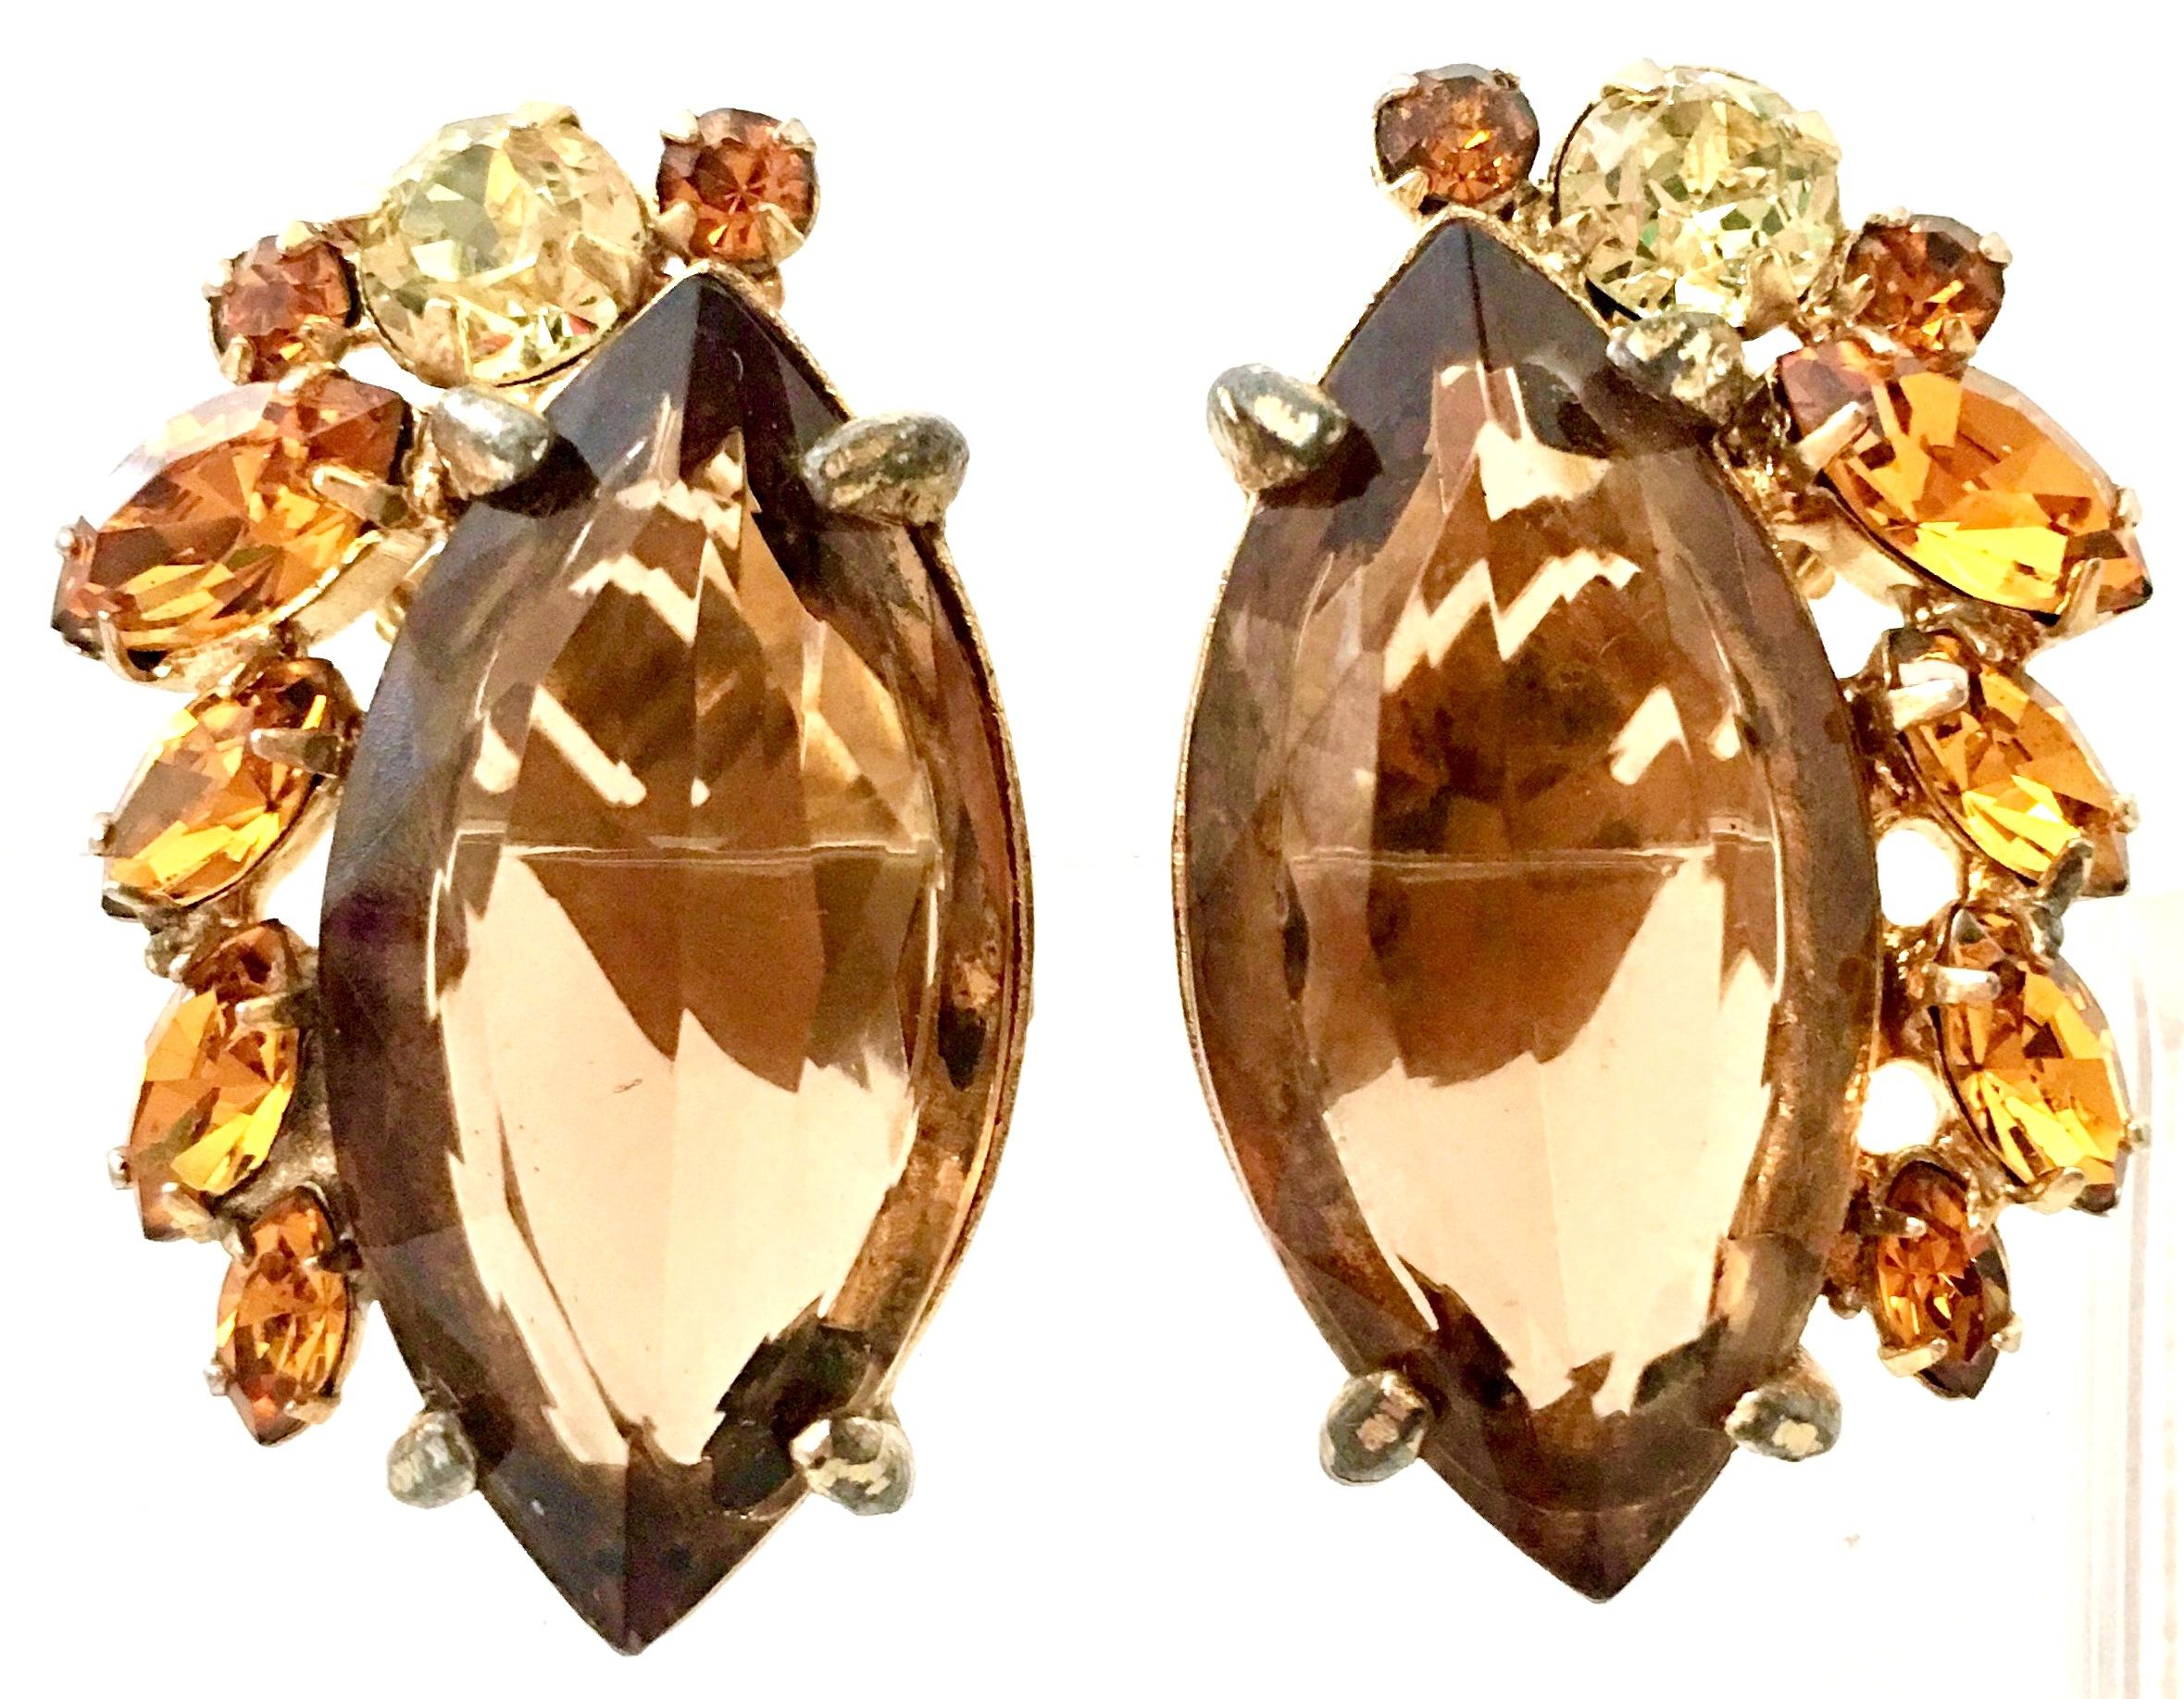 1960'S Pair Of Gold Plate & Swarovski Crystal Earrings By, Alice Caviness. Features gold plate fancy prong set brilliant cut and faceted Swarovski crystal topaz, citrine and yellow diamond stones. Large central topaz stone is approximately 1.13